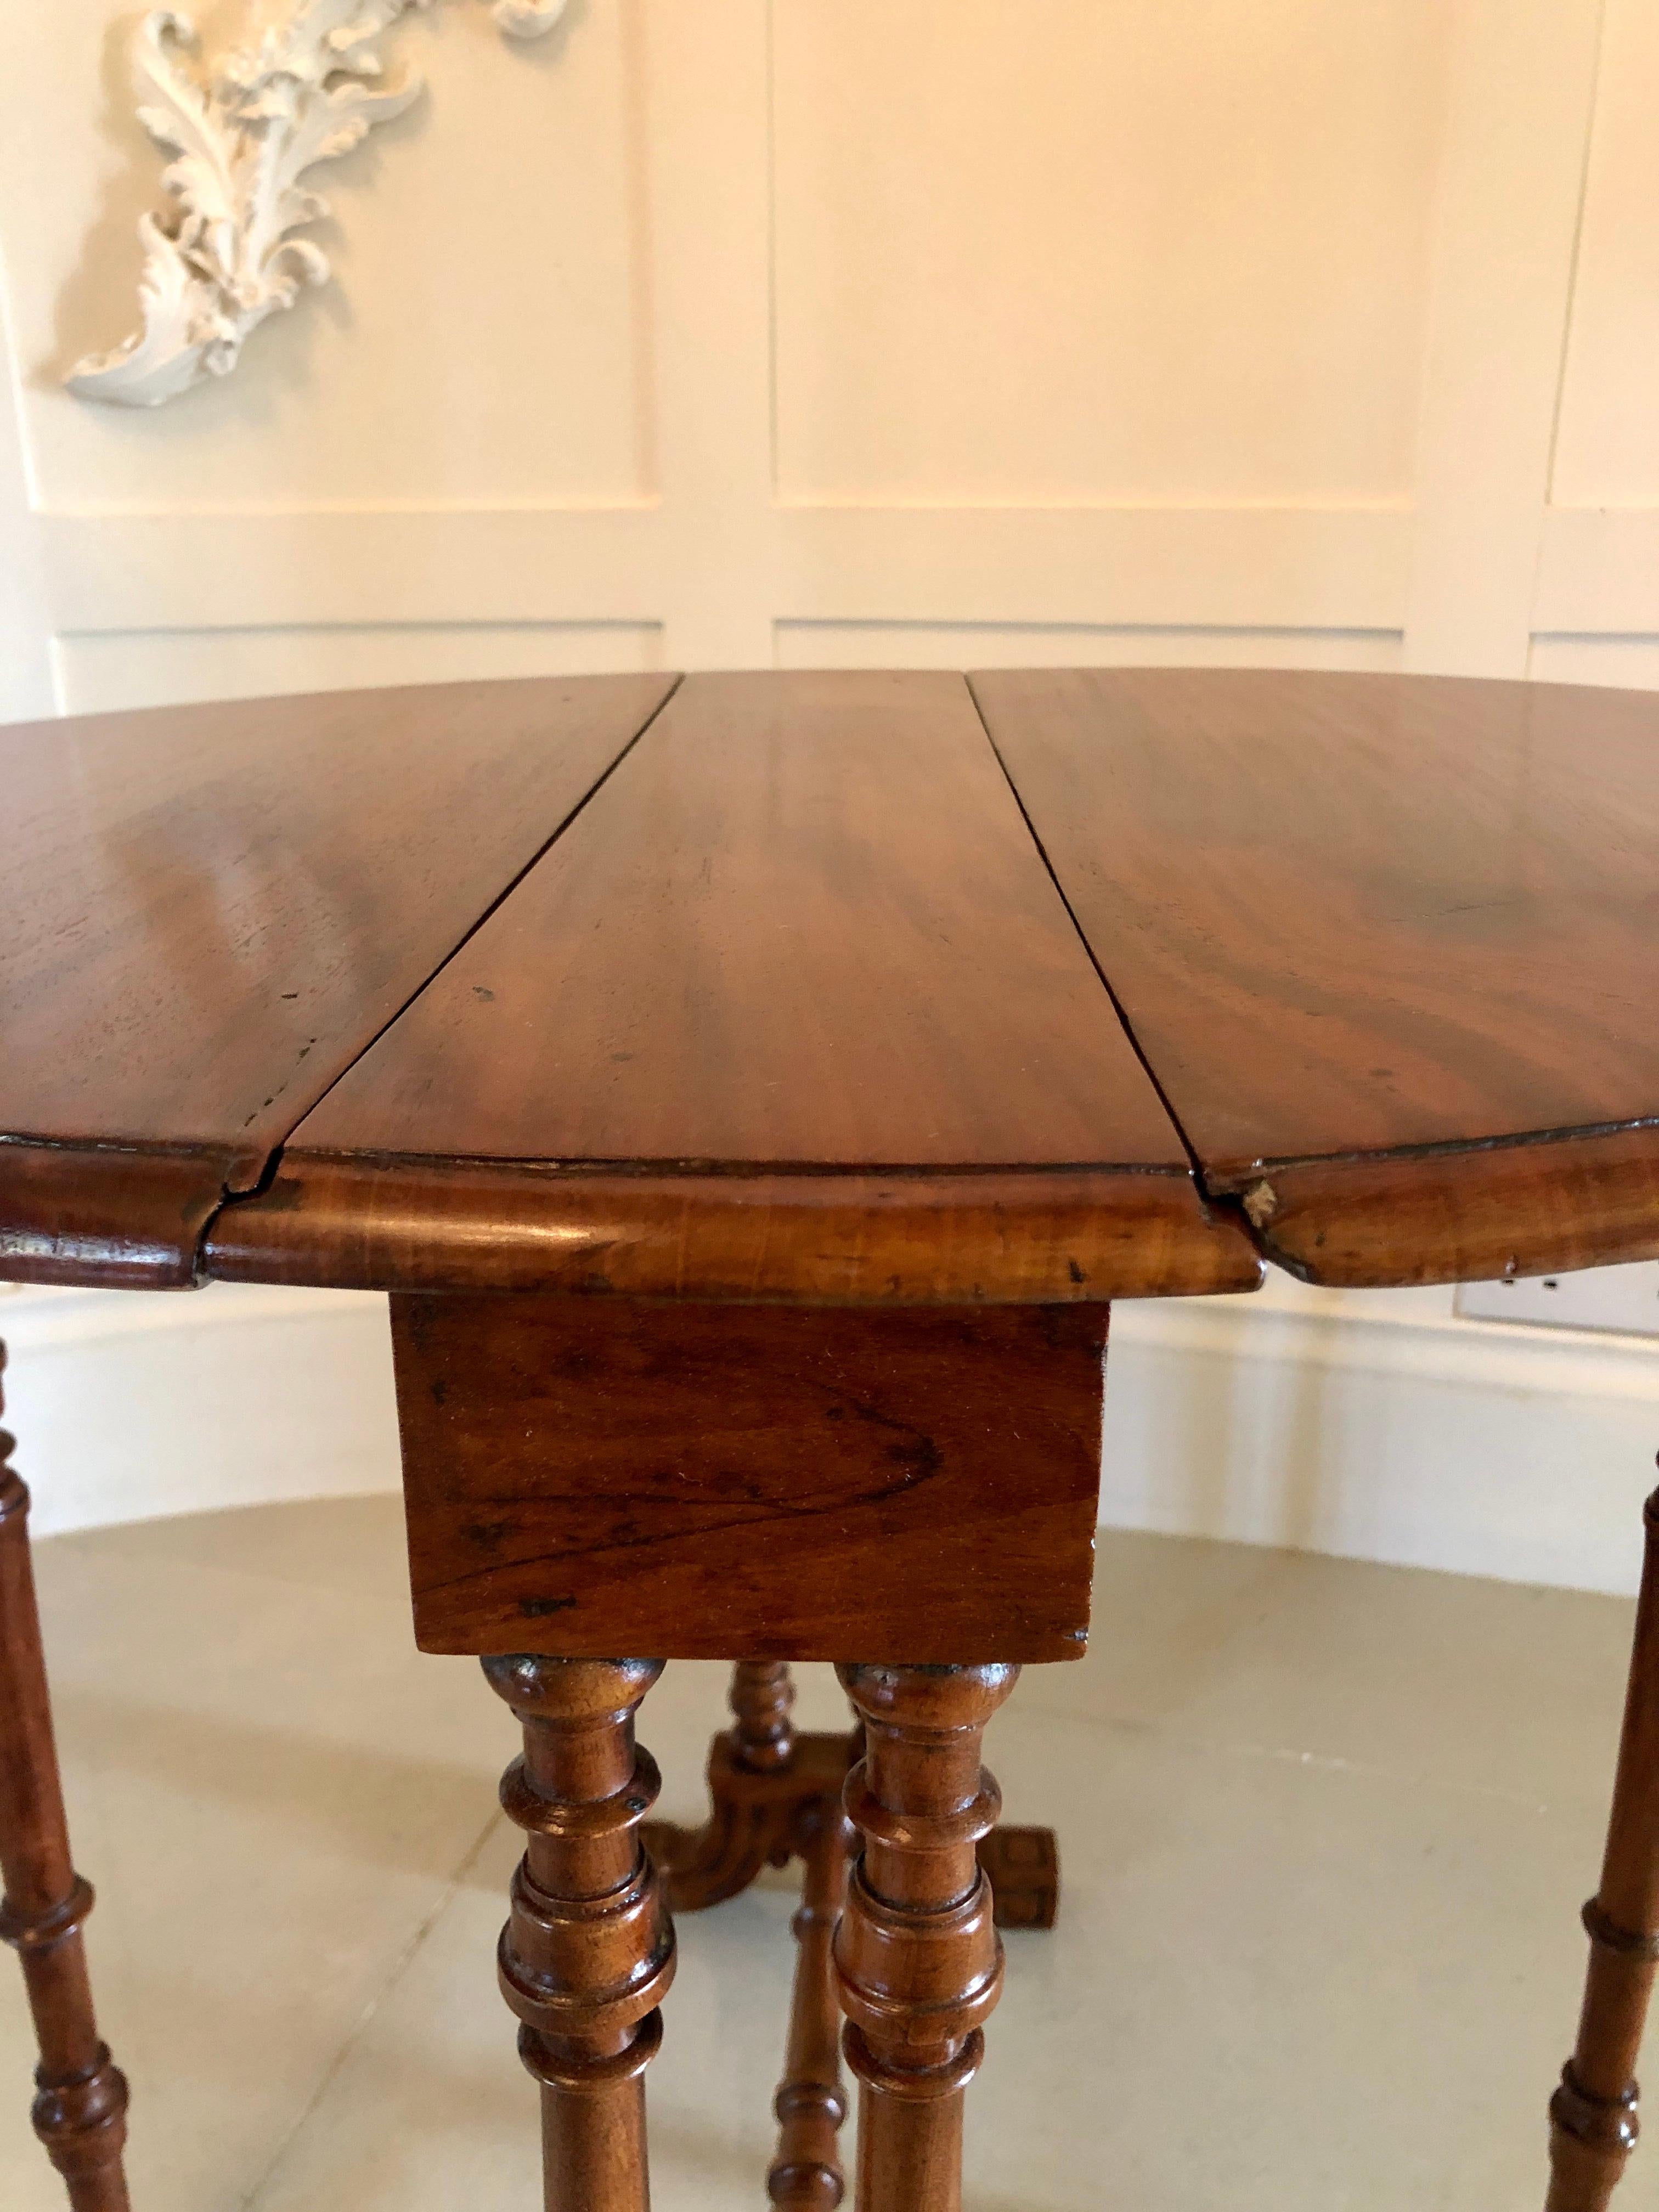 sutherland tables for sale